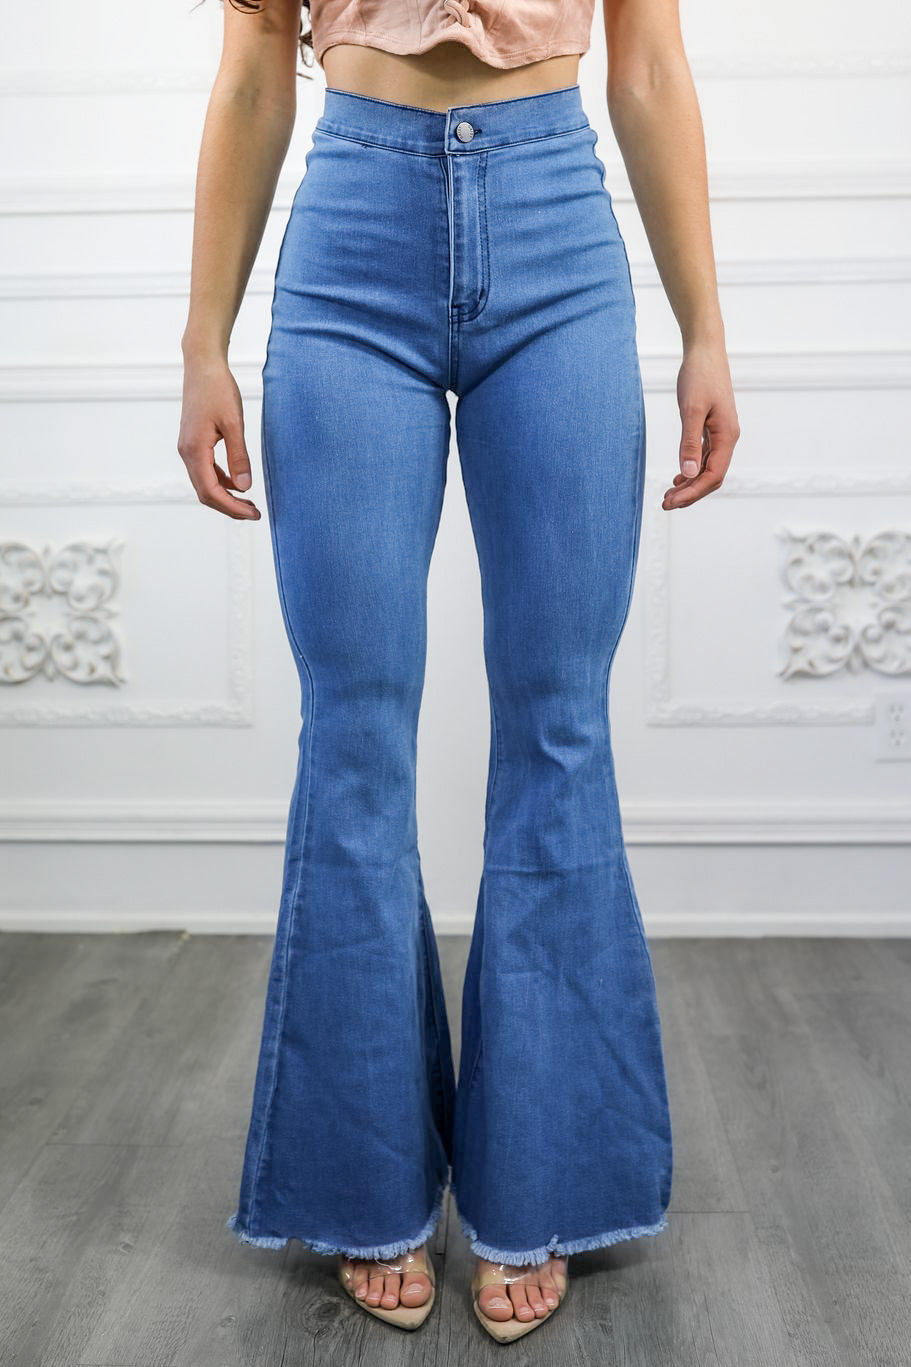 Classic Bell Bottom Jeans without Front Pockets